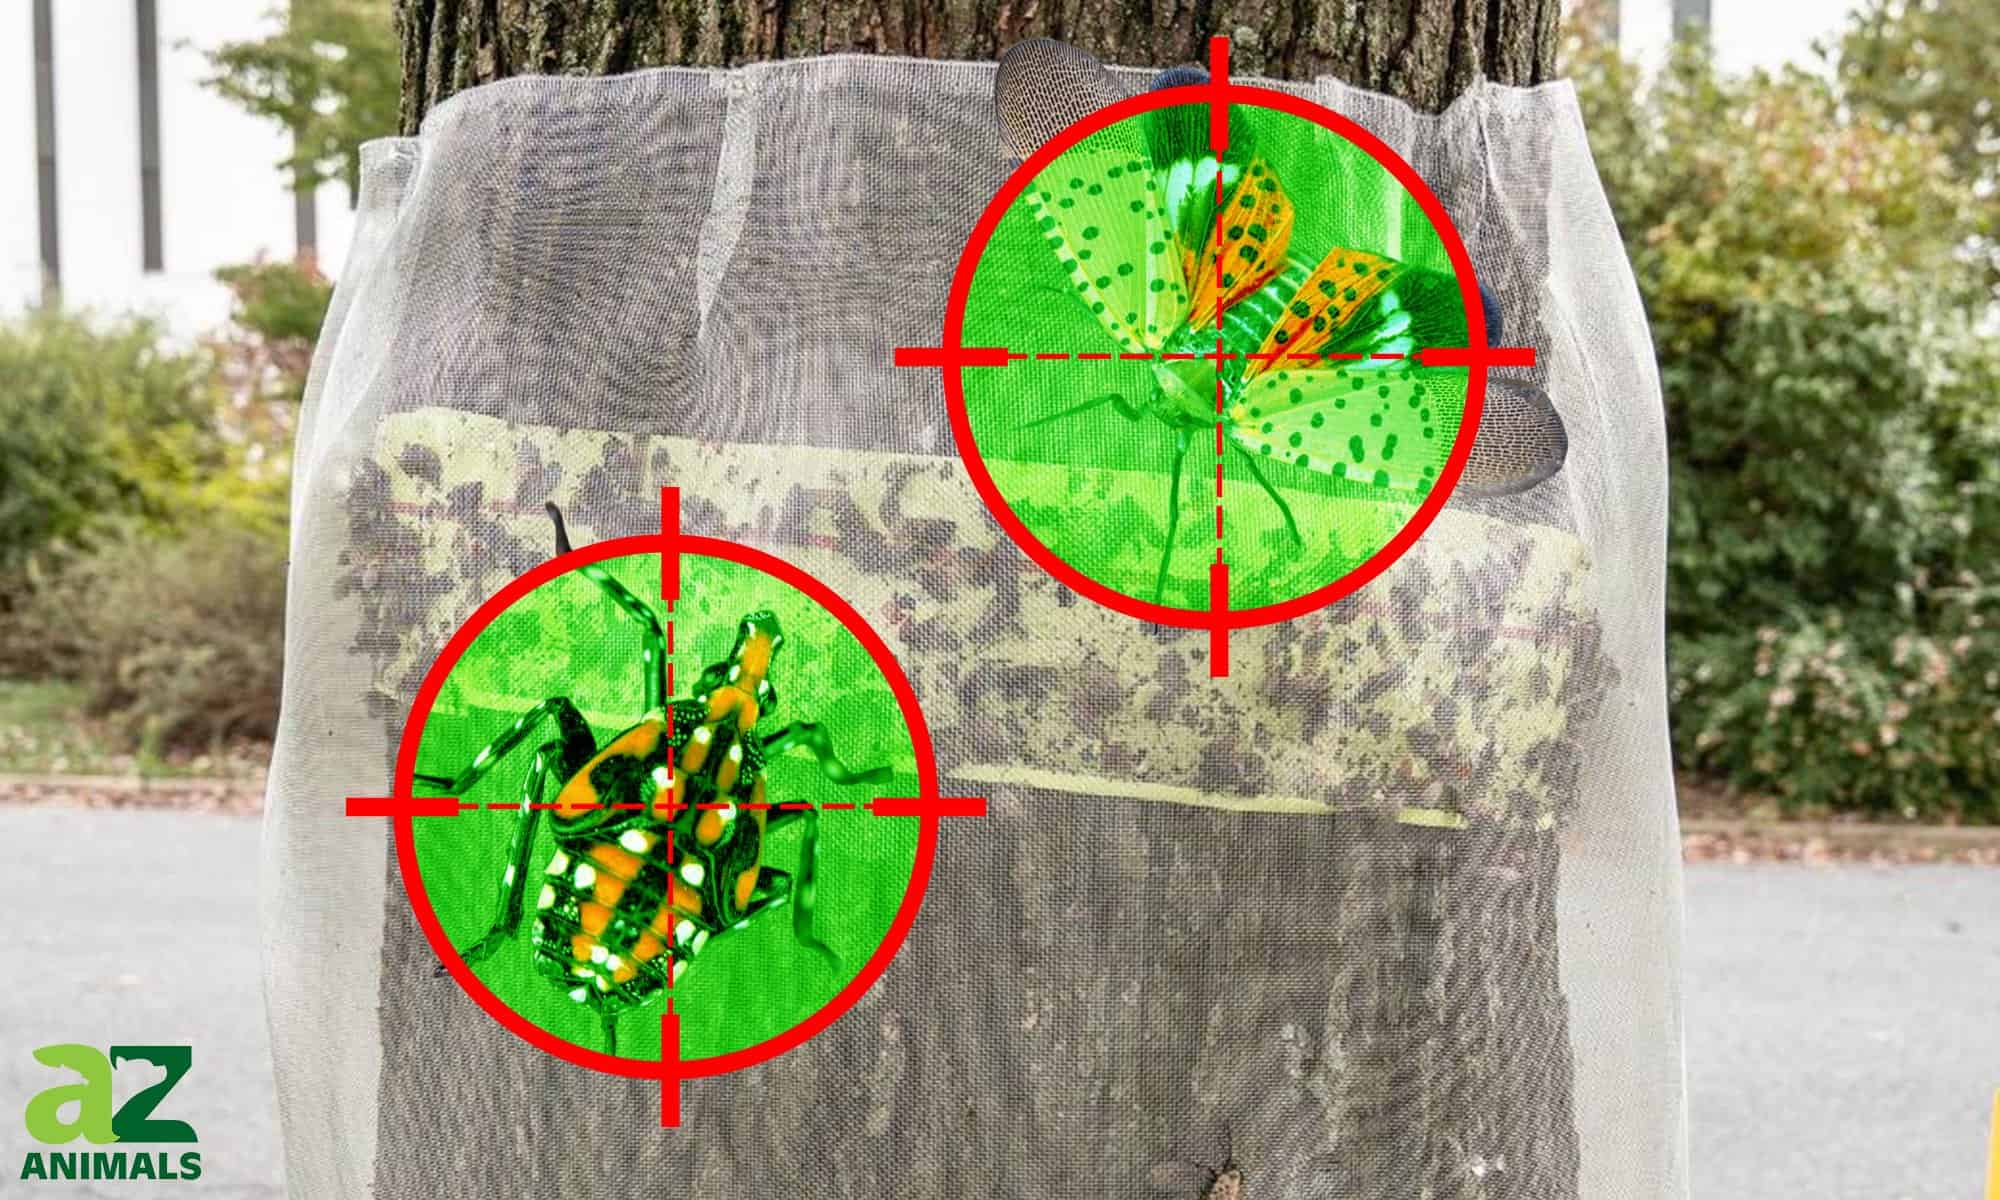 how to trap spotted lanternflies